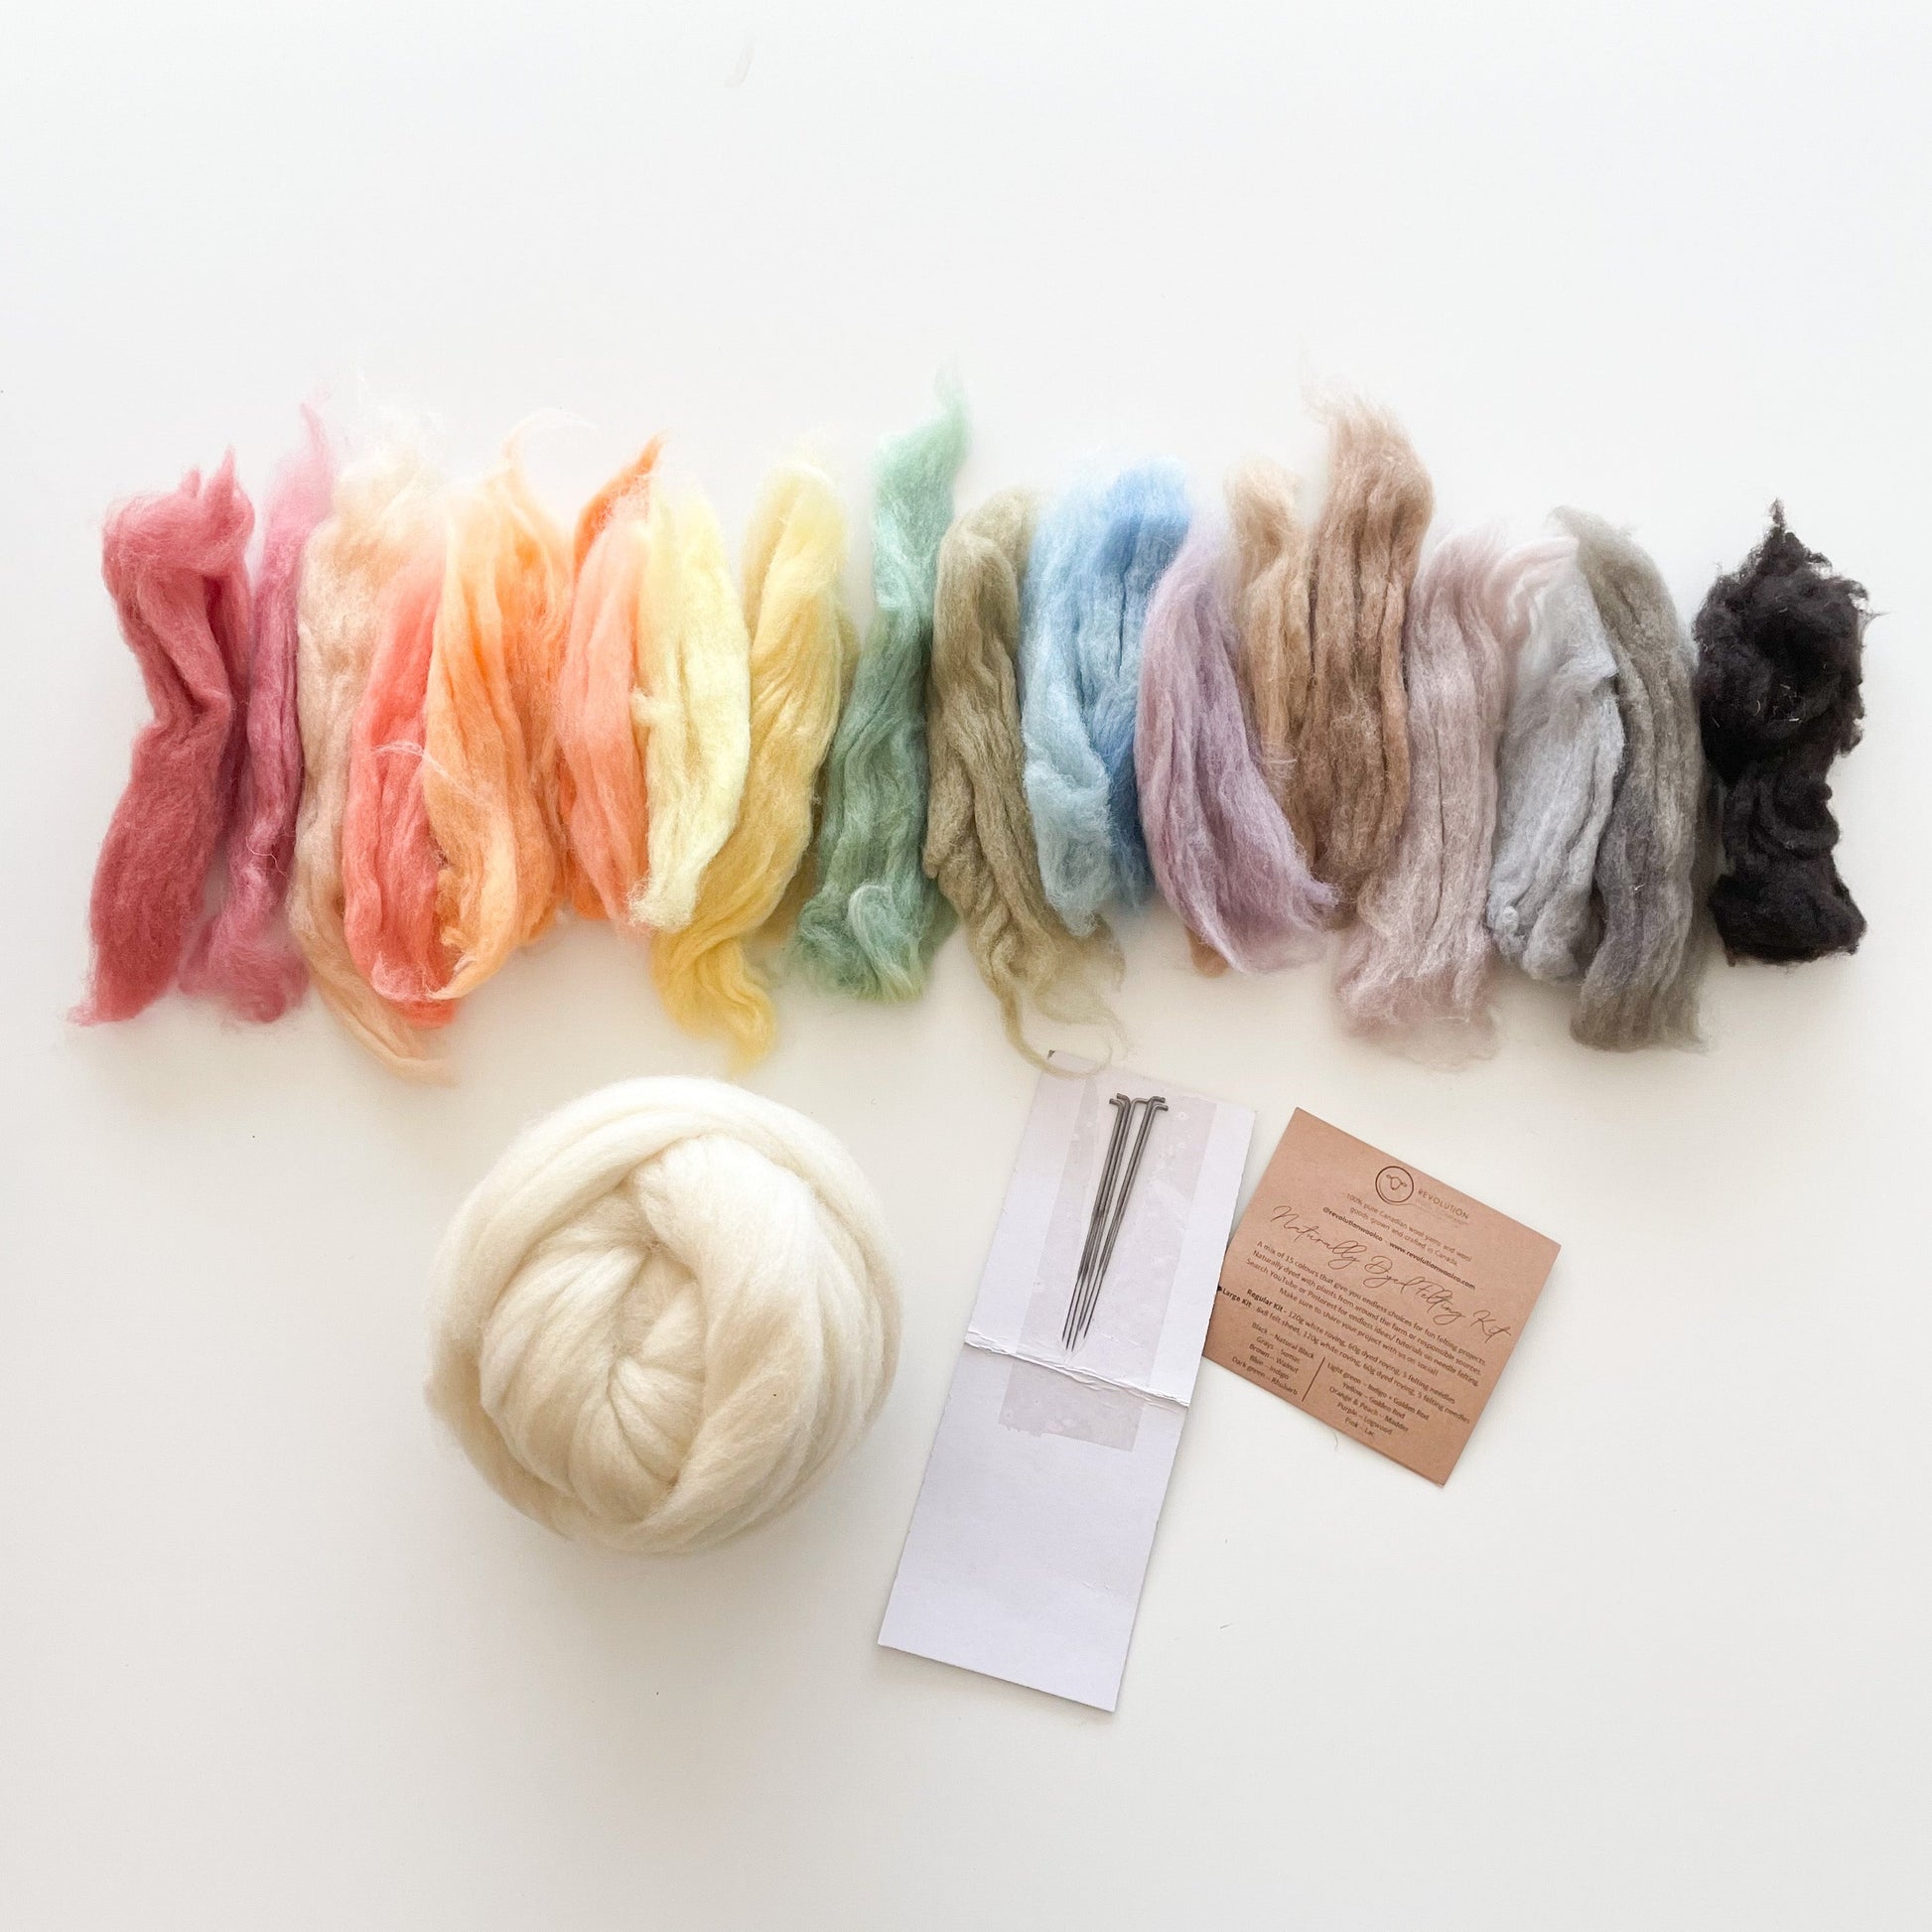 How To Mend and Patch with Needle Felting